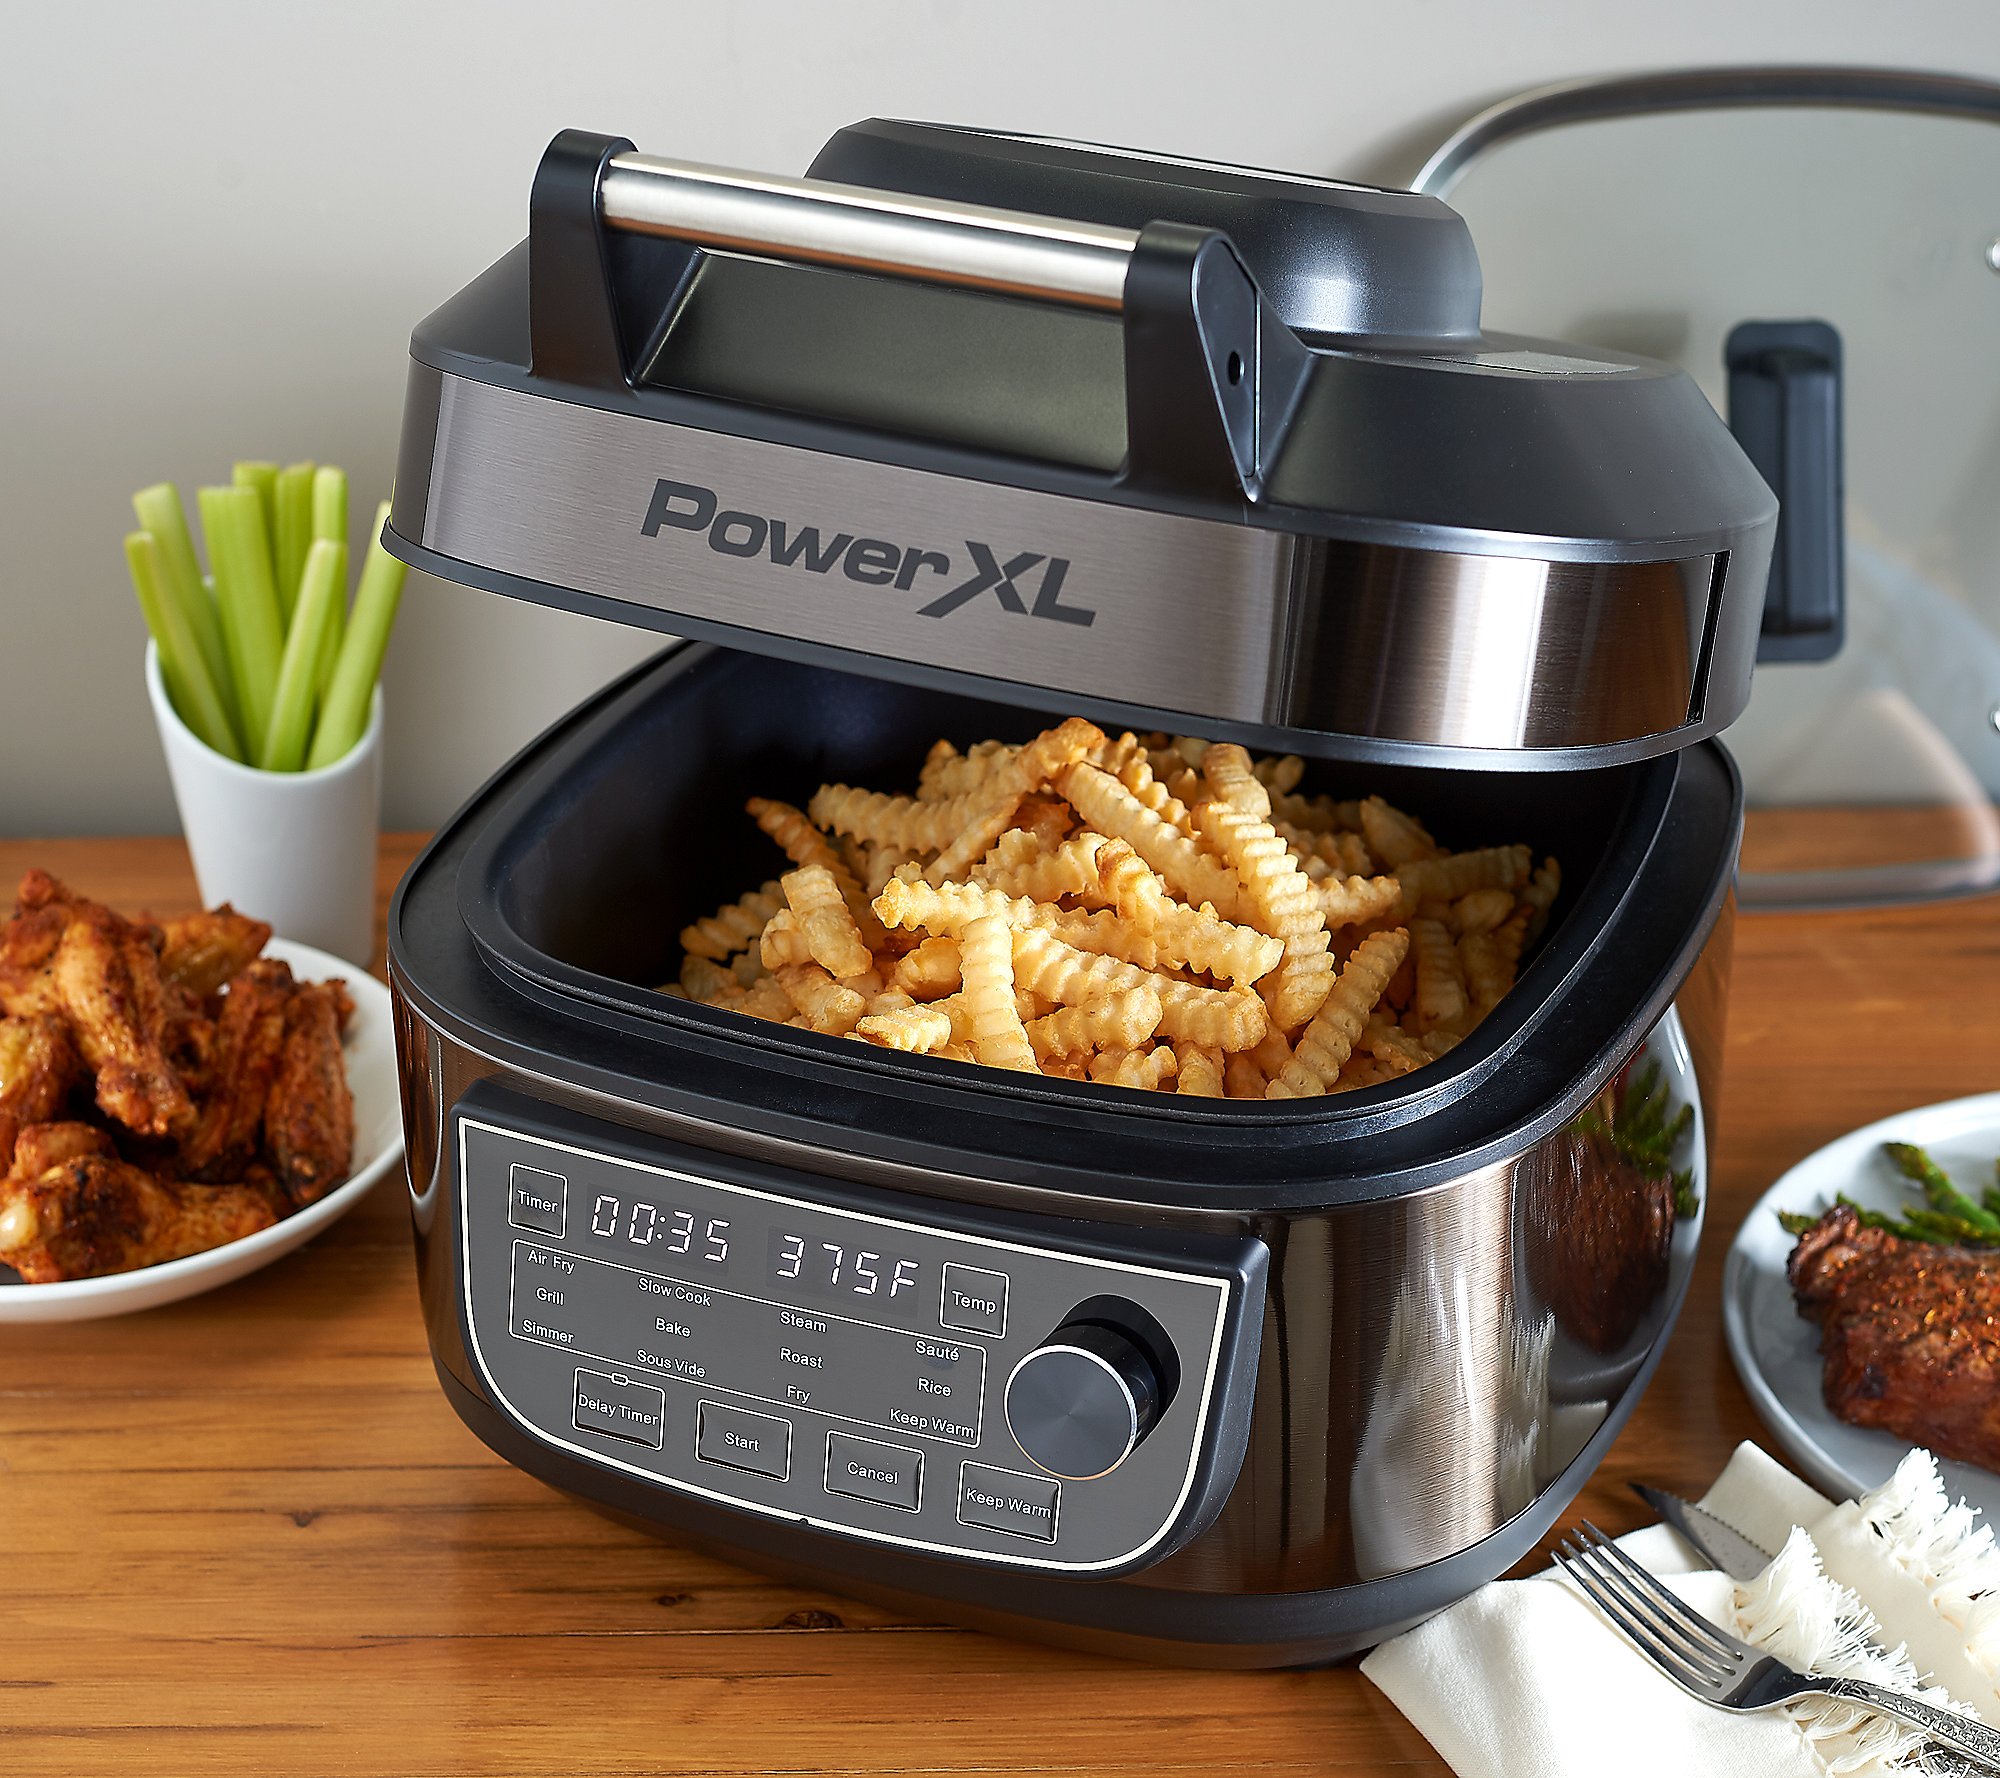 Silver PowerXL Grill Air Fryer Combo